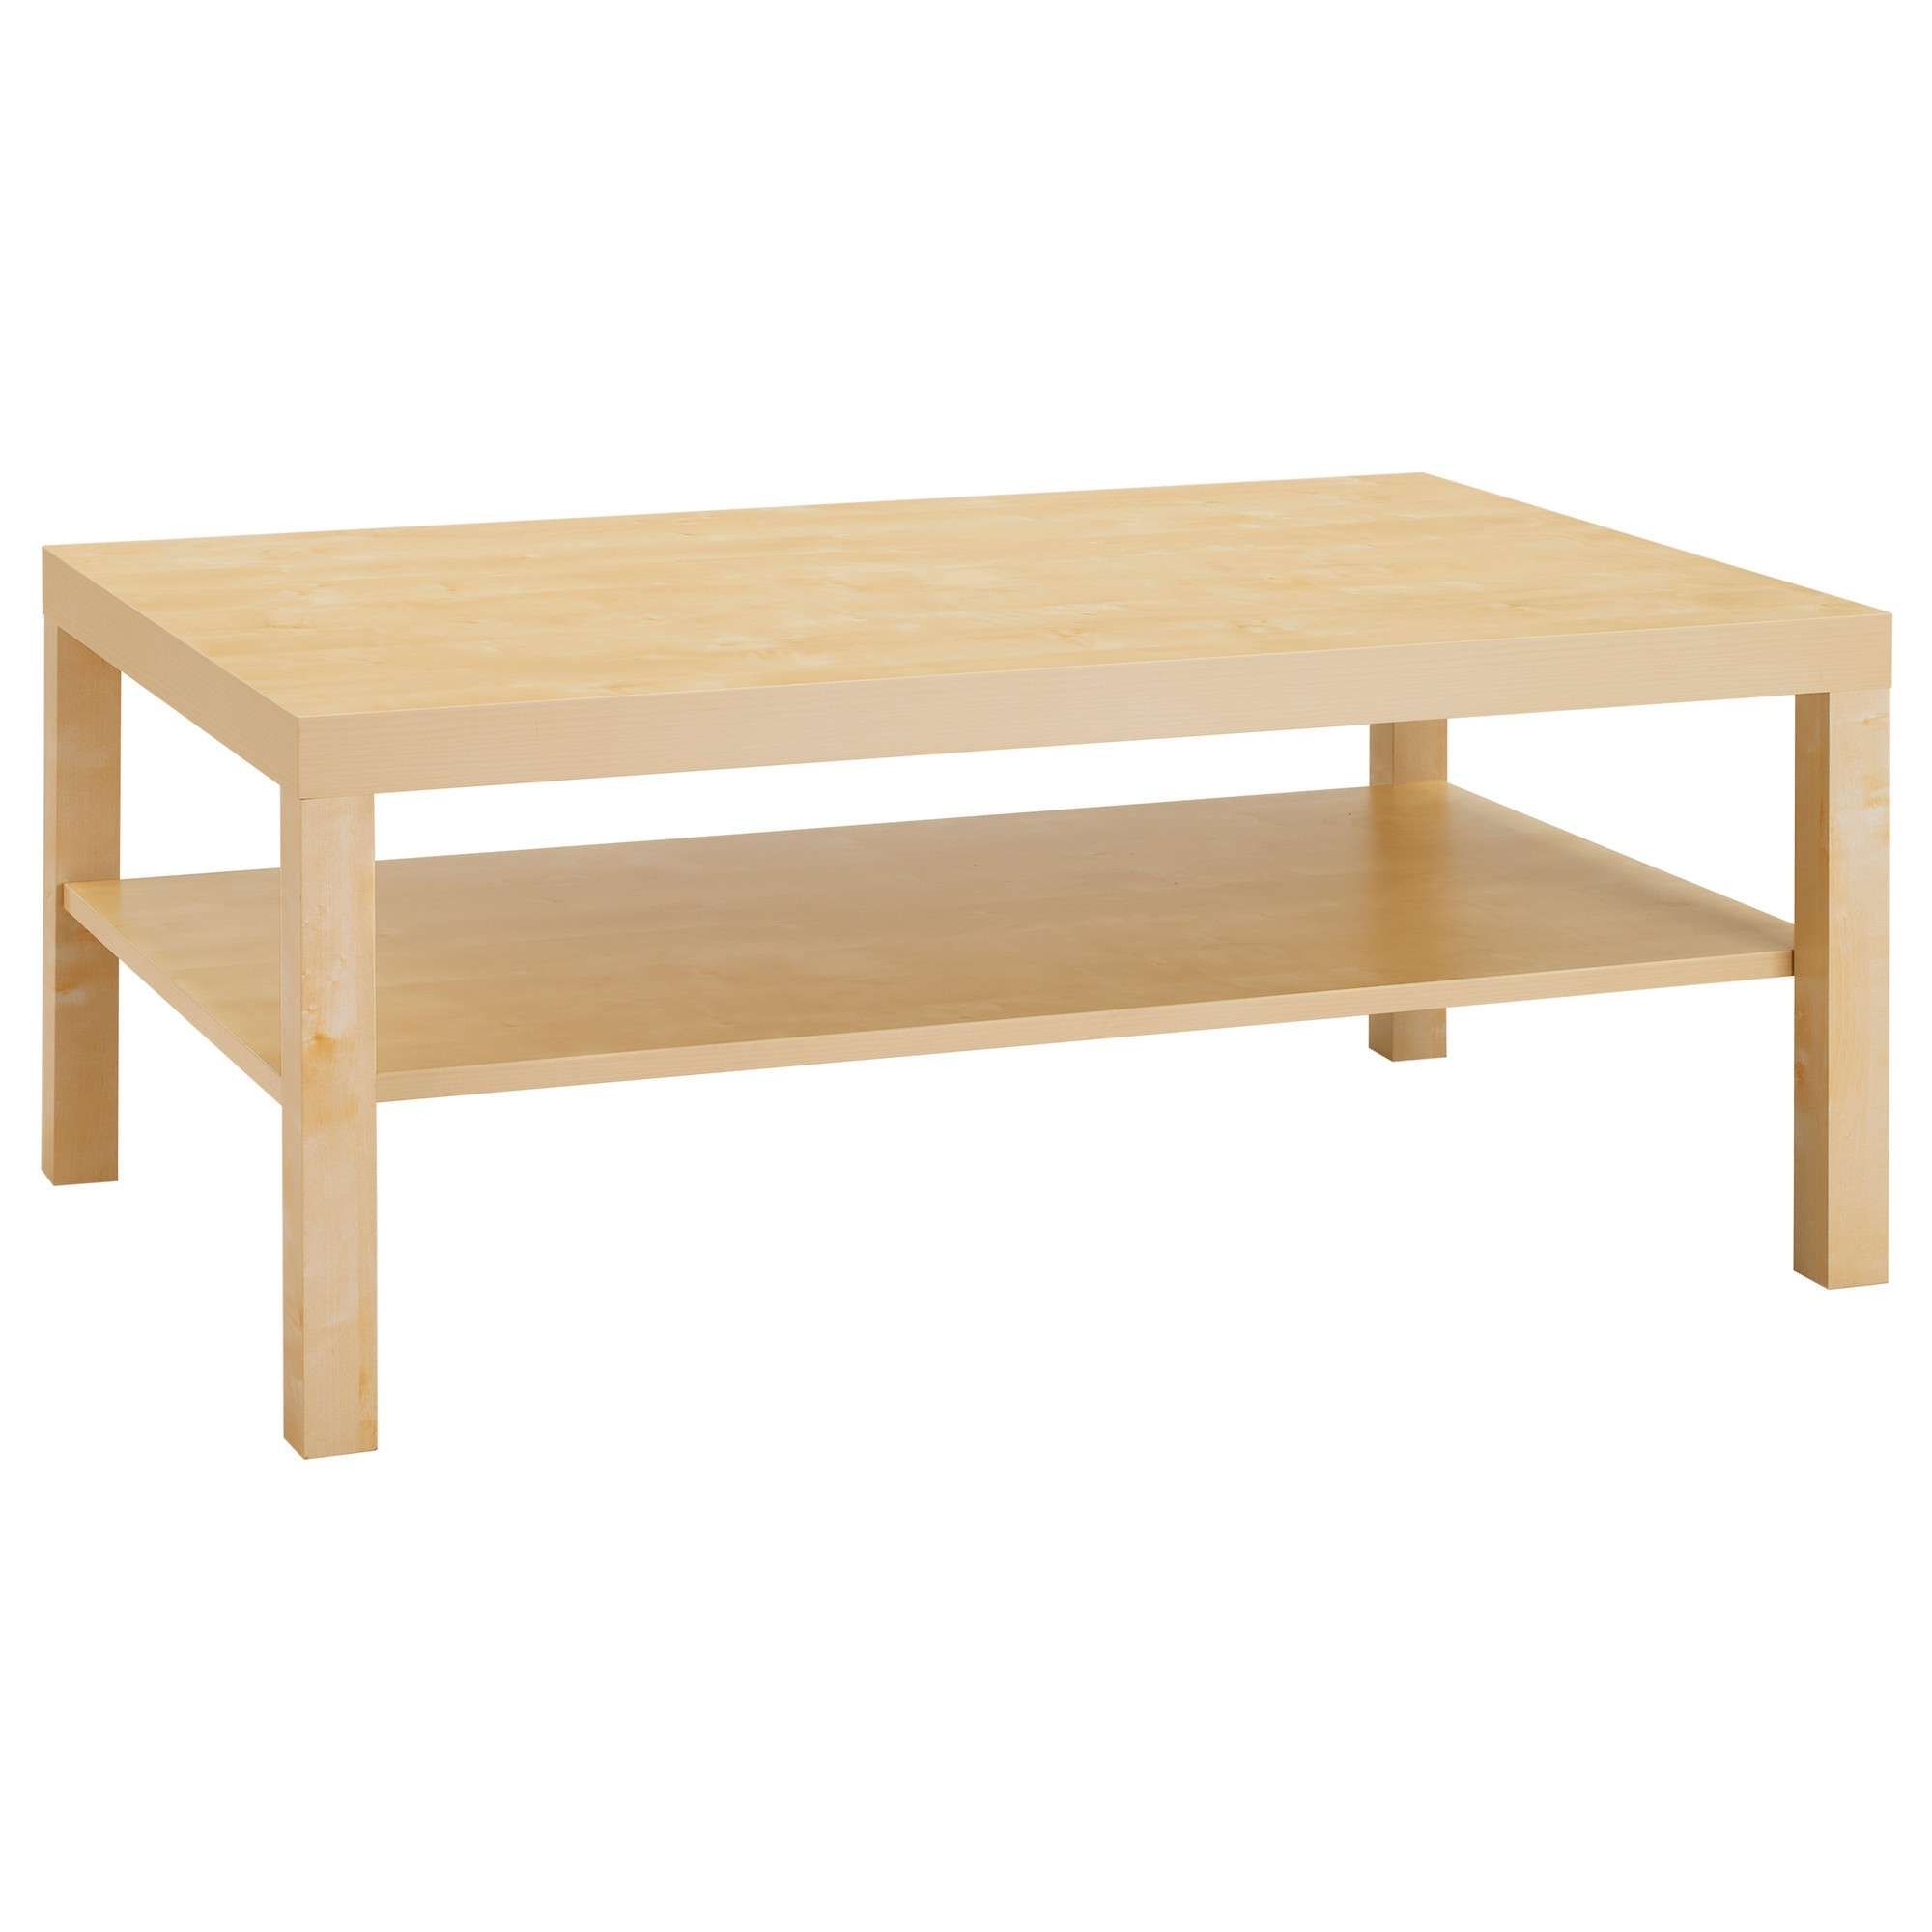 Lack Coffee Table – Black Brown – Ikea Intended For Most Up To Date Cheap Oak Coffee Tables (View 3 of 20)